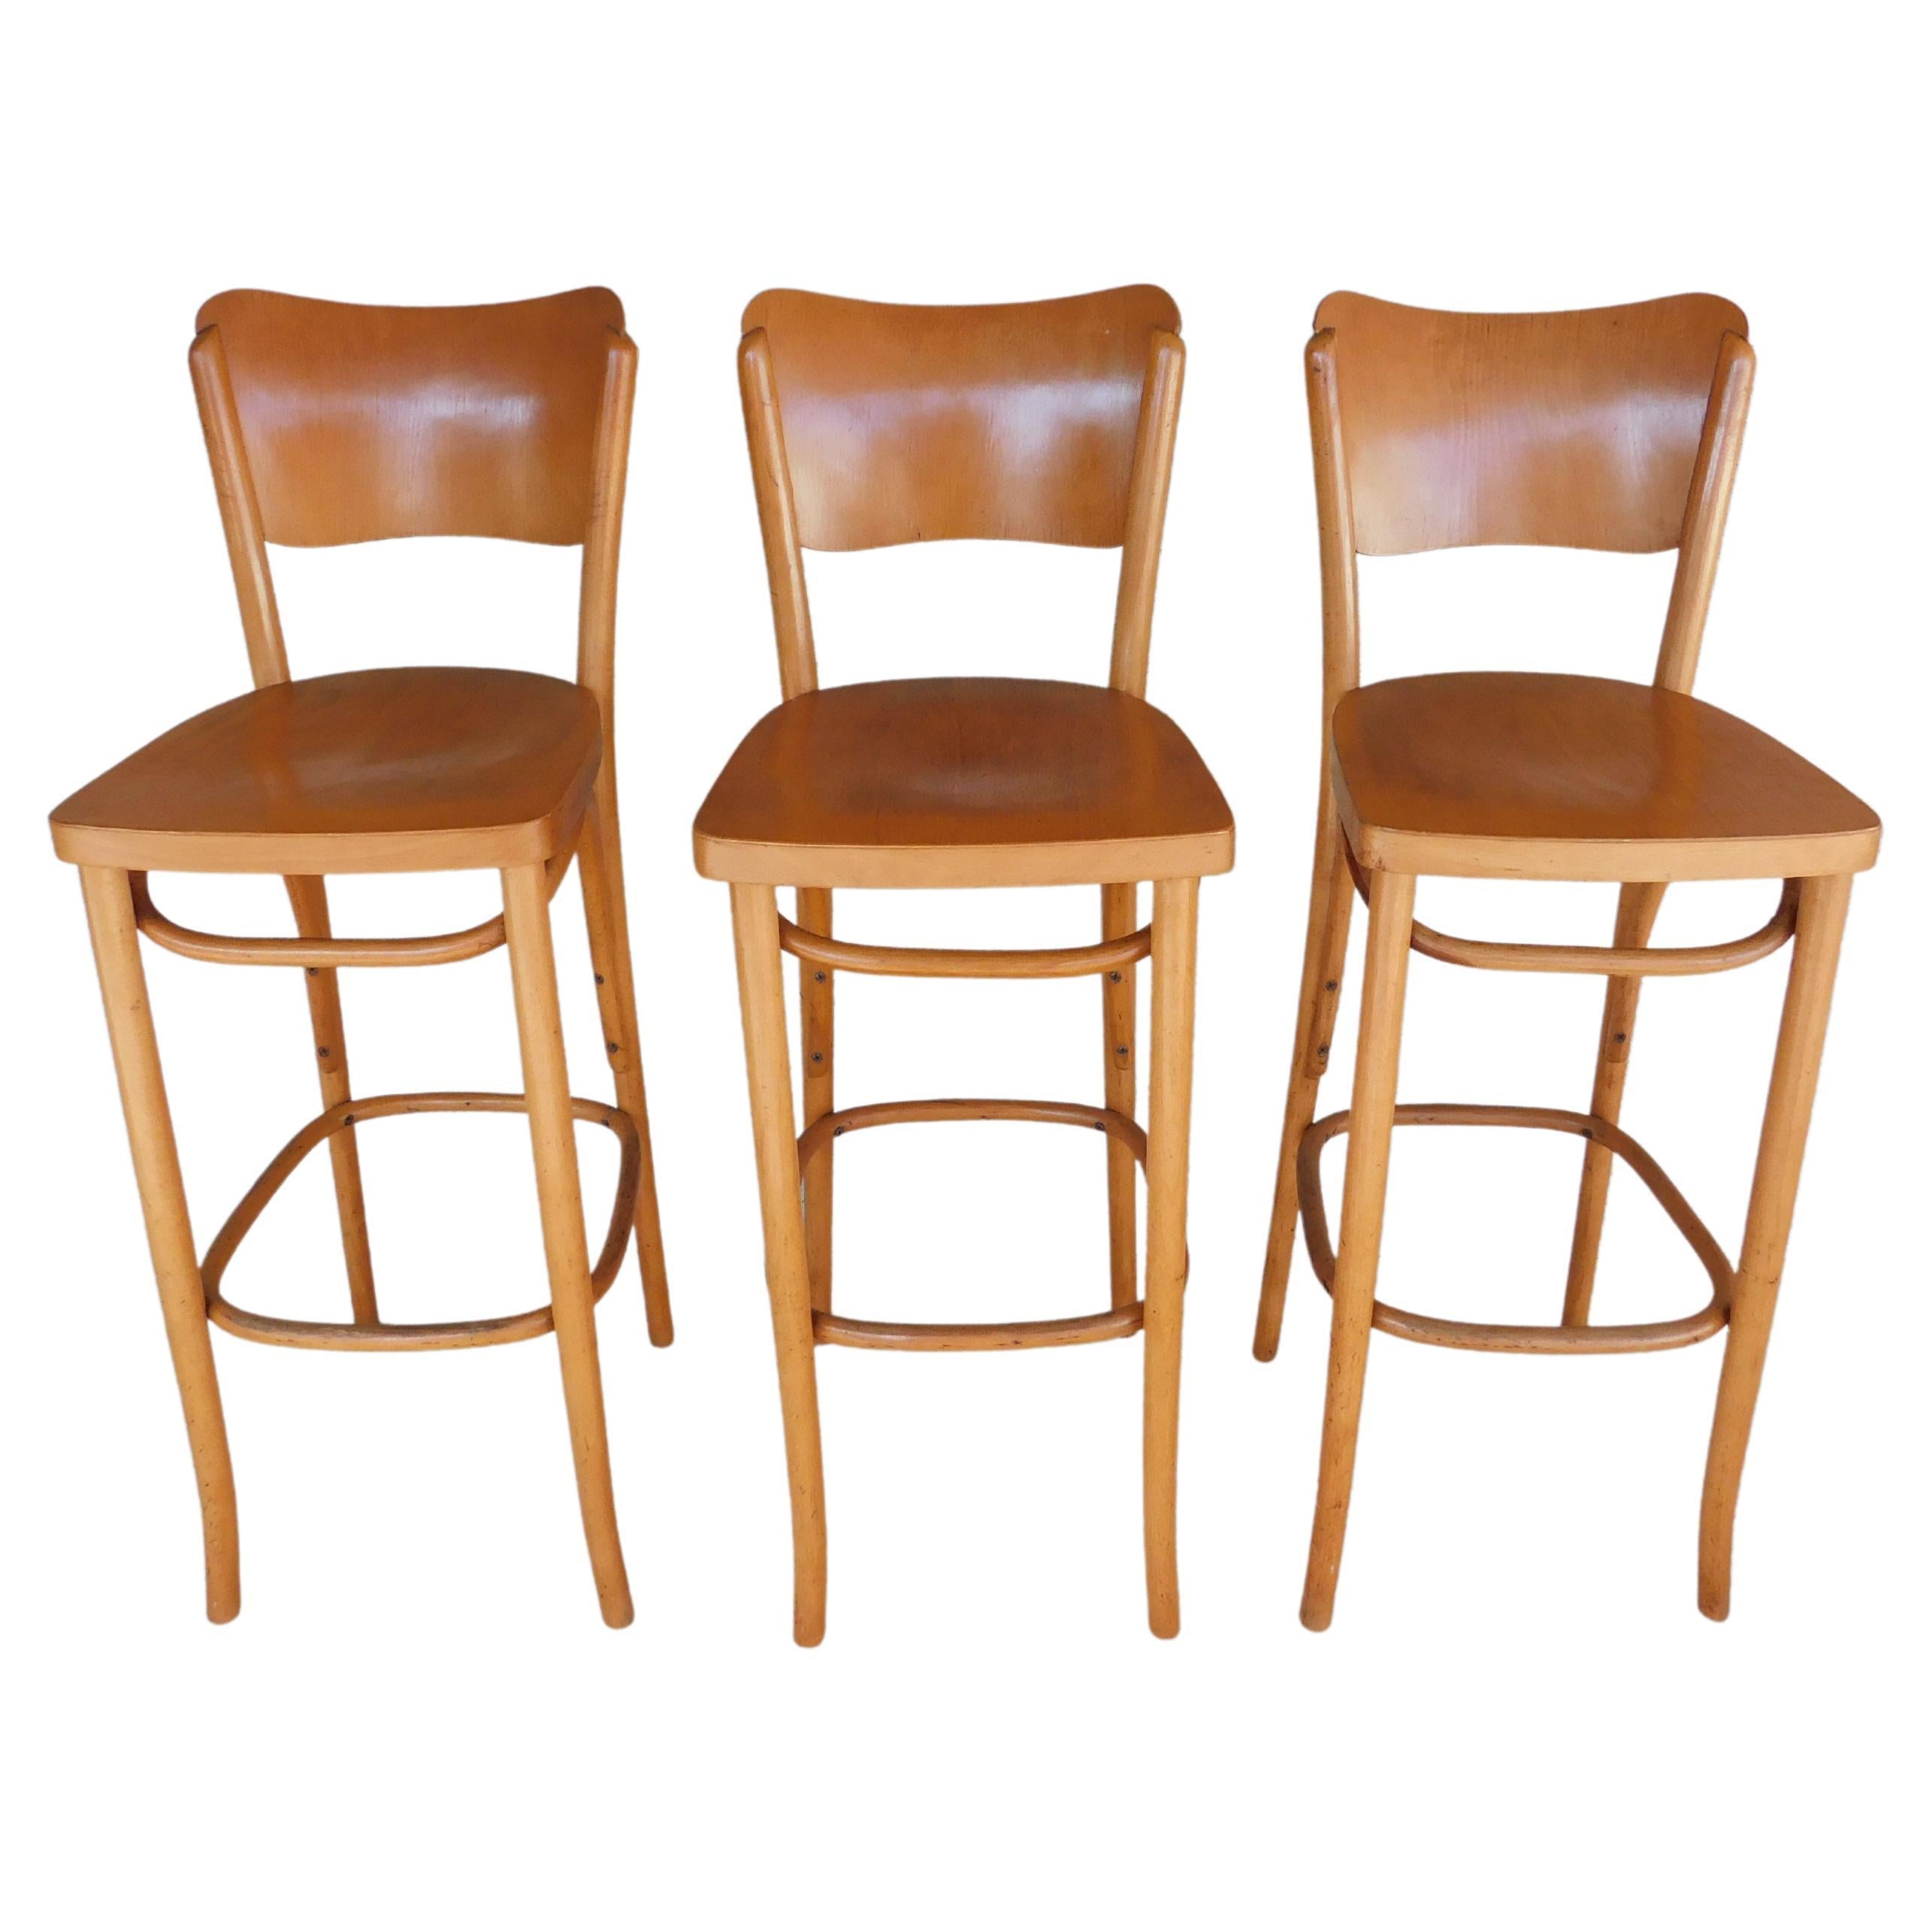 Mid-Century Stools Bentwood Attributed to Thonet, Set of 3